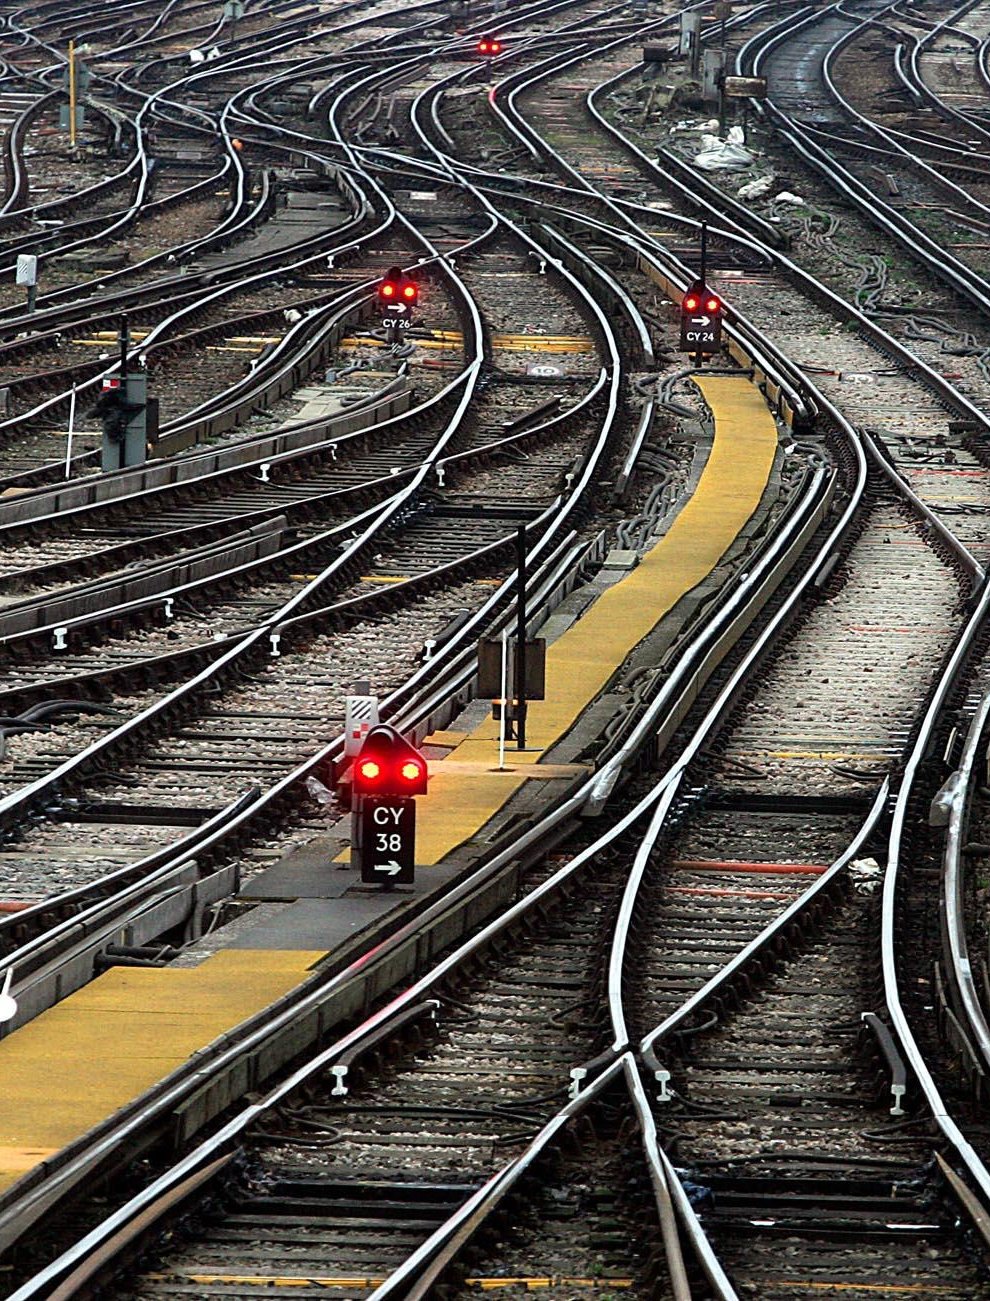 Plans to create a transport network in the south east of England have been revealed (Cathal McNaughton/PA)